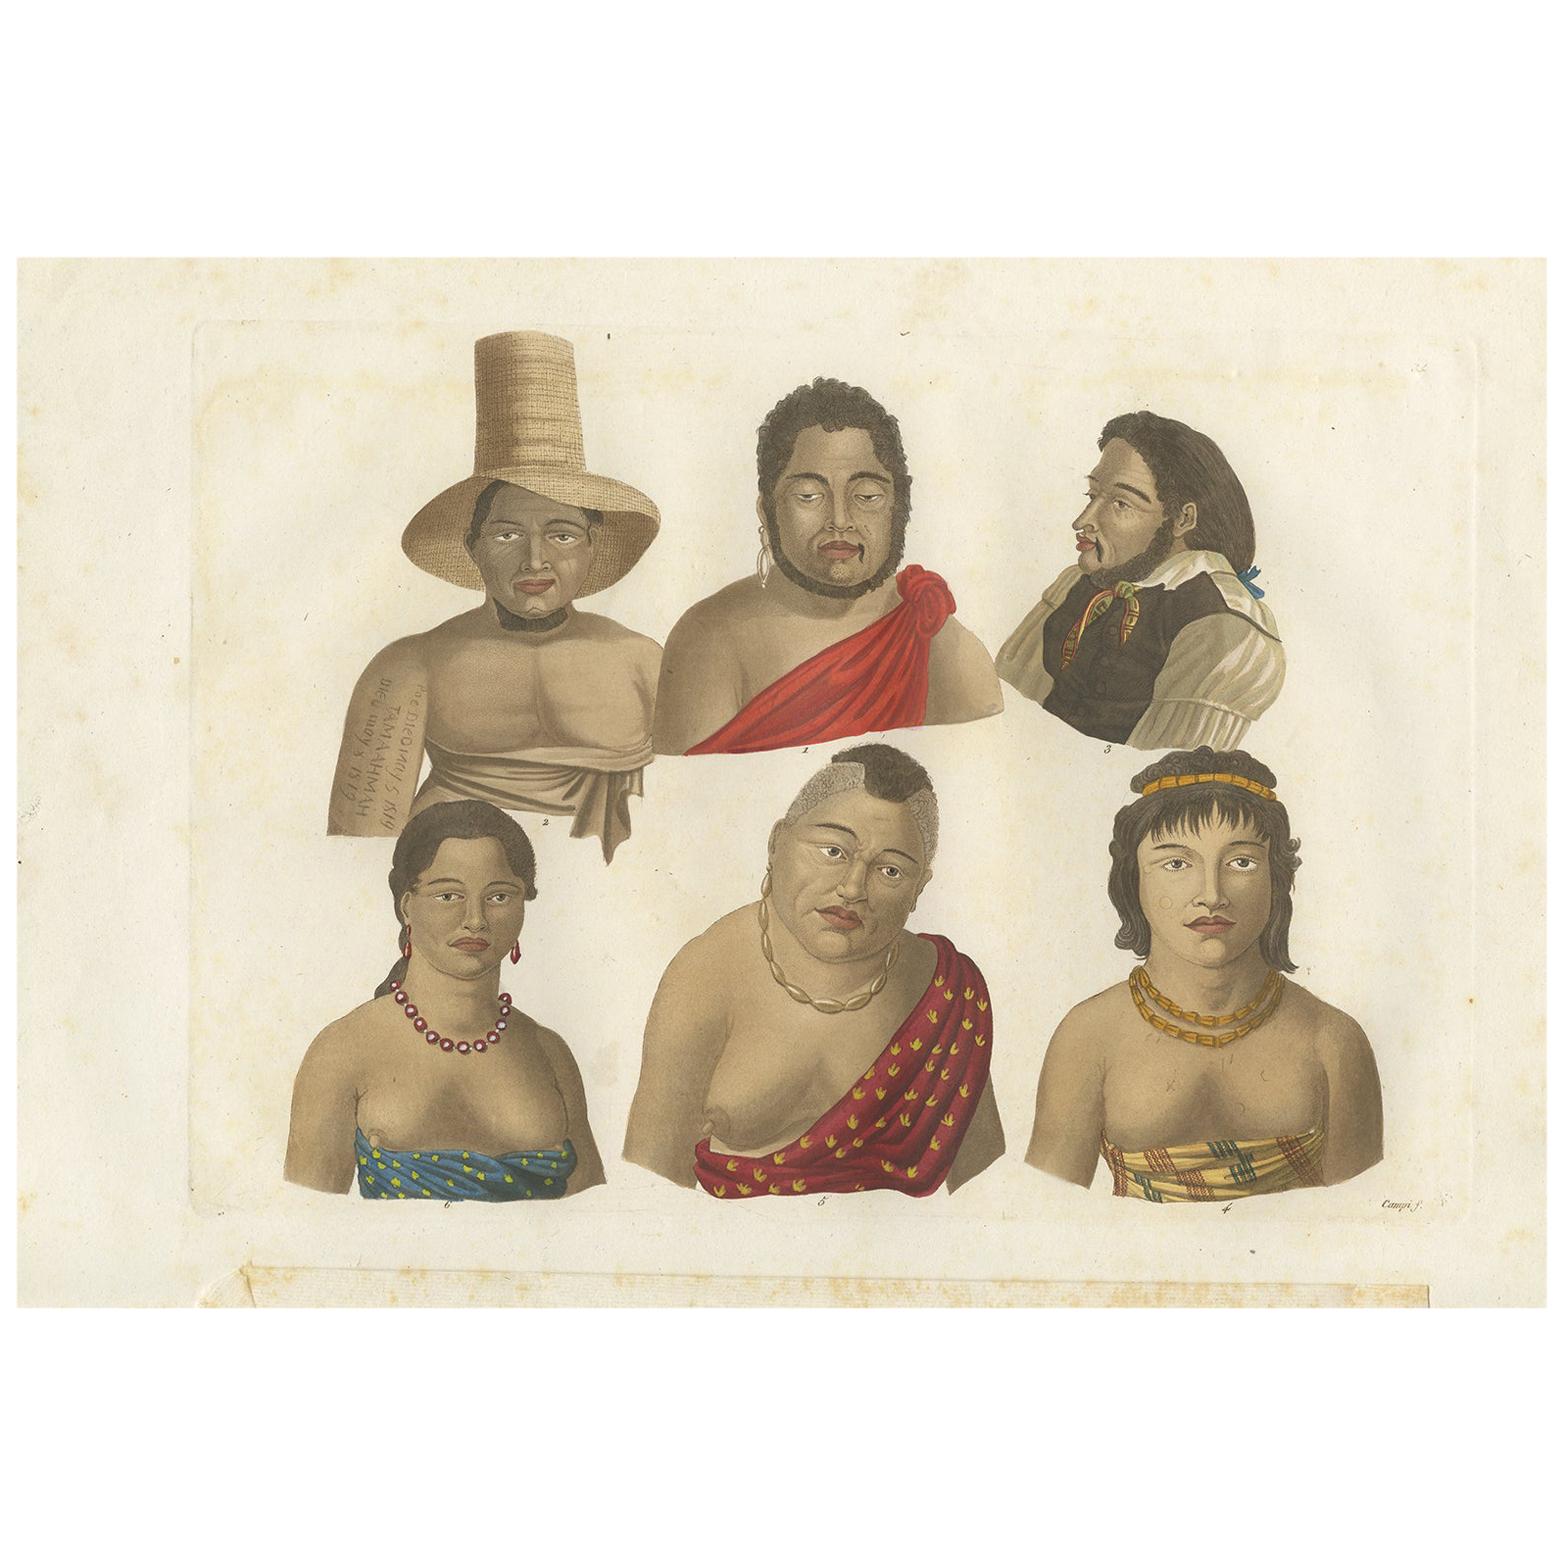 Antique Print of Inhabitants of the Region of the Sandwich Islands by Ferrario For Sale